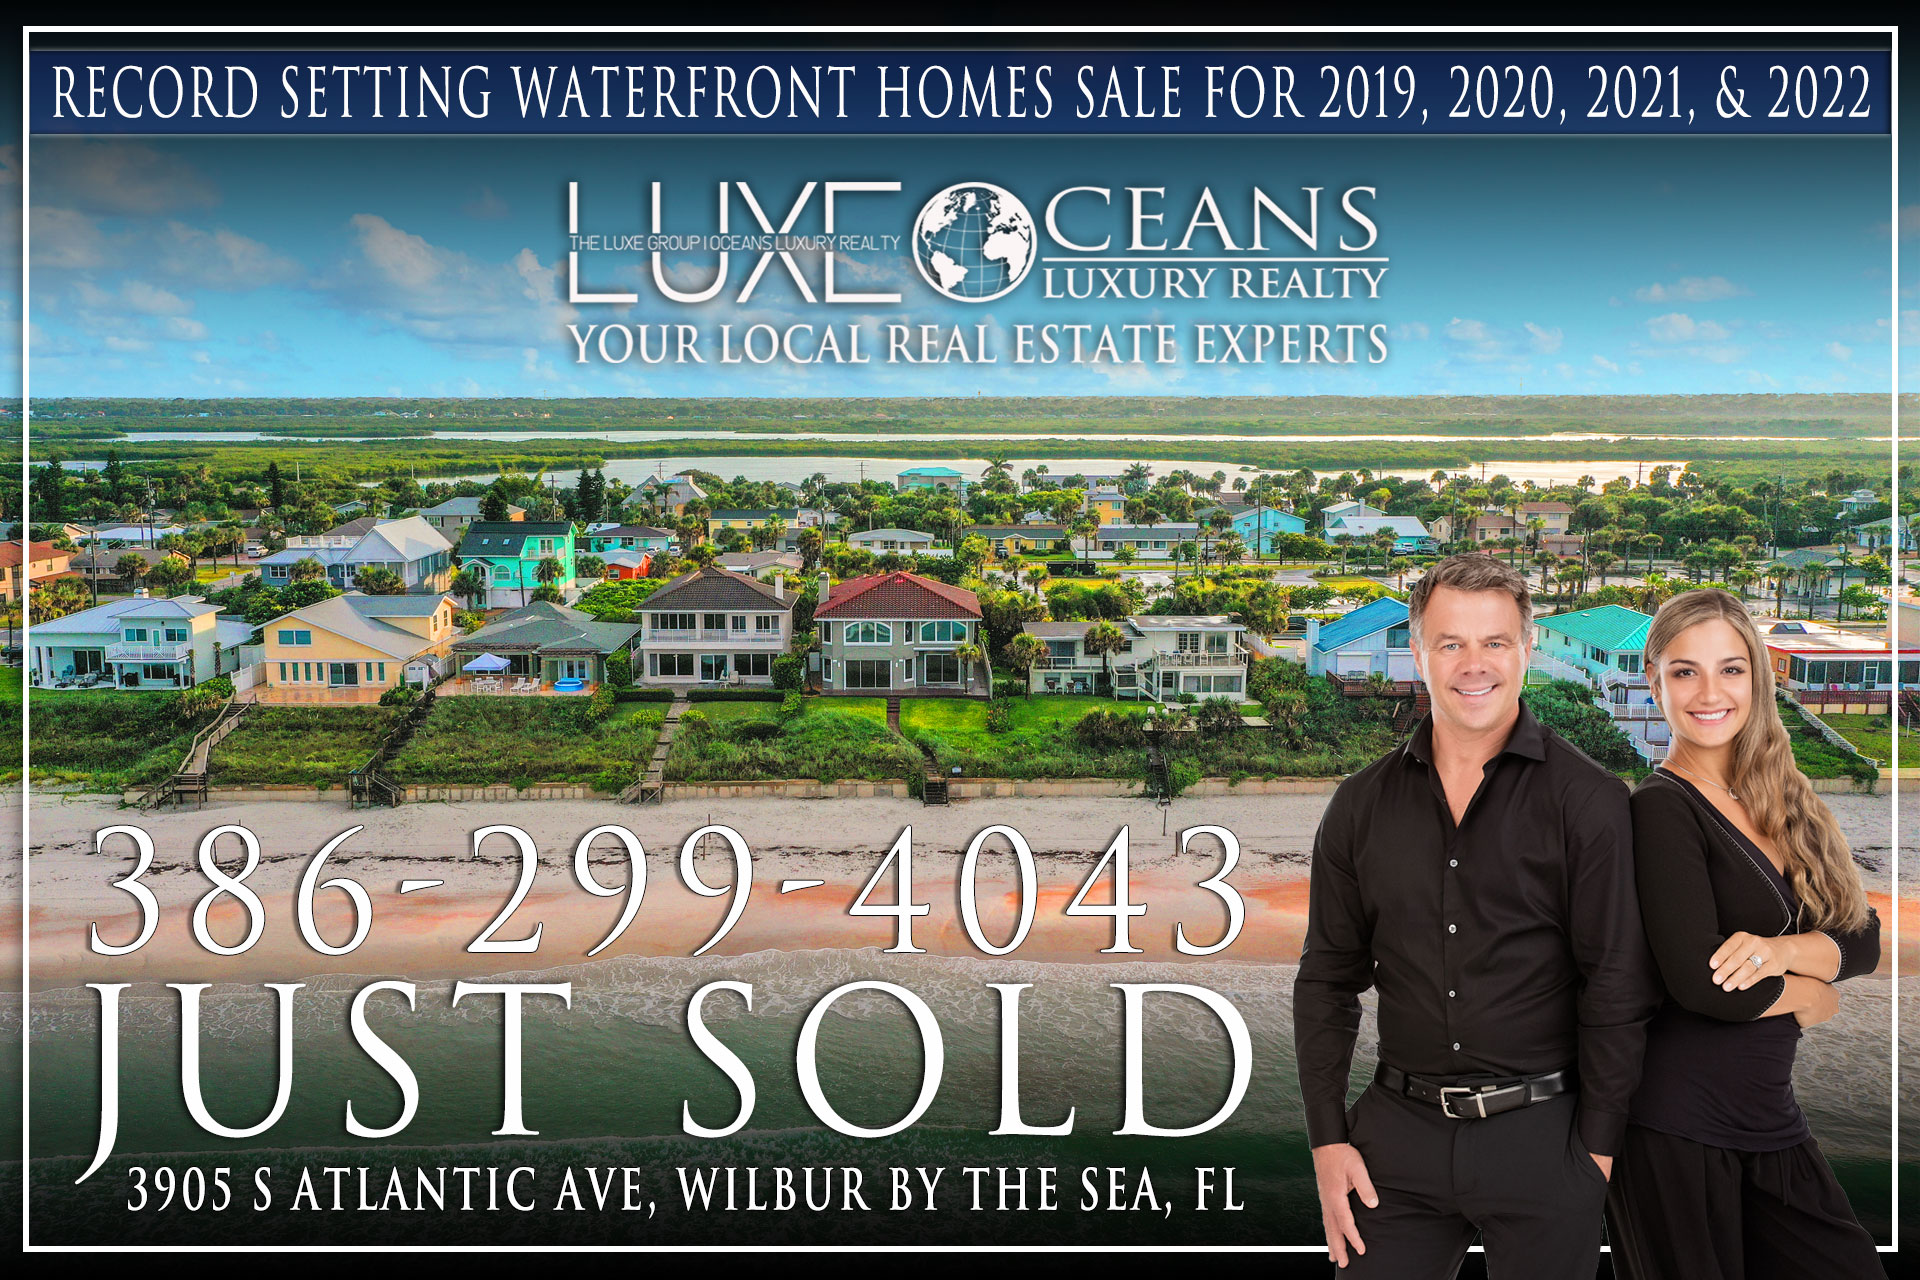 Oceanfront Homes For Sale. 3905 S Atlantic Ave. Wilbur By the Sea. Florida waterfront homes for sale. Daytona Beach Shore The LUXE Group at Oceans Luxury Realty 386-299-4043